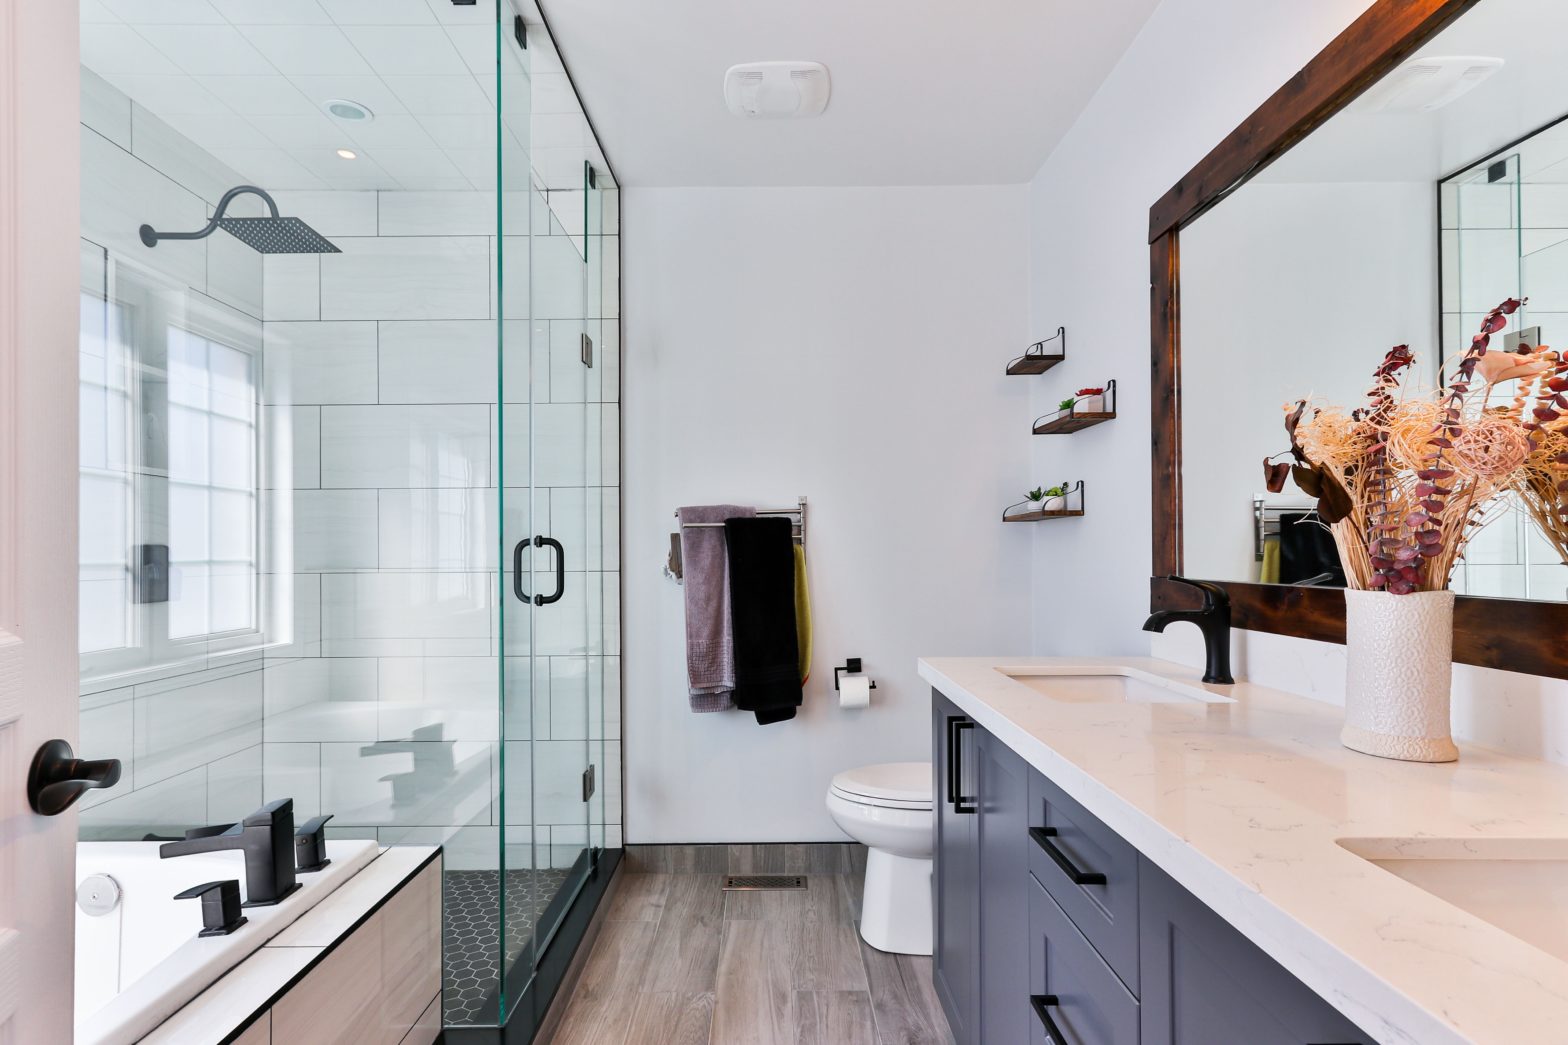 Ceiling lights and new light switch plates can make a big difference, but sometimes a bathroom simply needs a complete overhaul. Trust RUPP Family Builders with your next bathroom project!